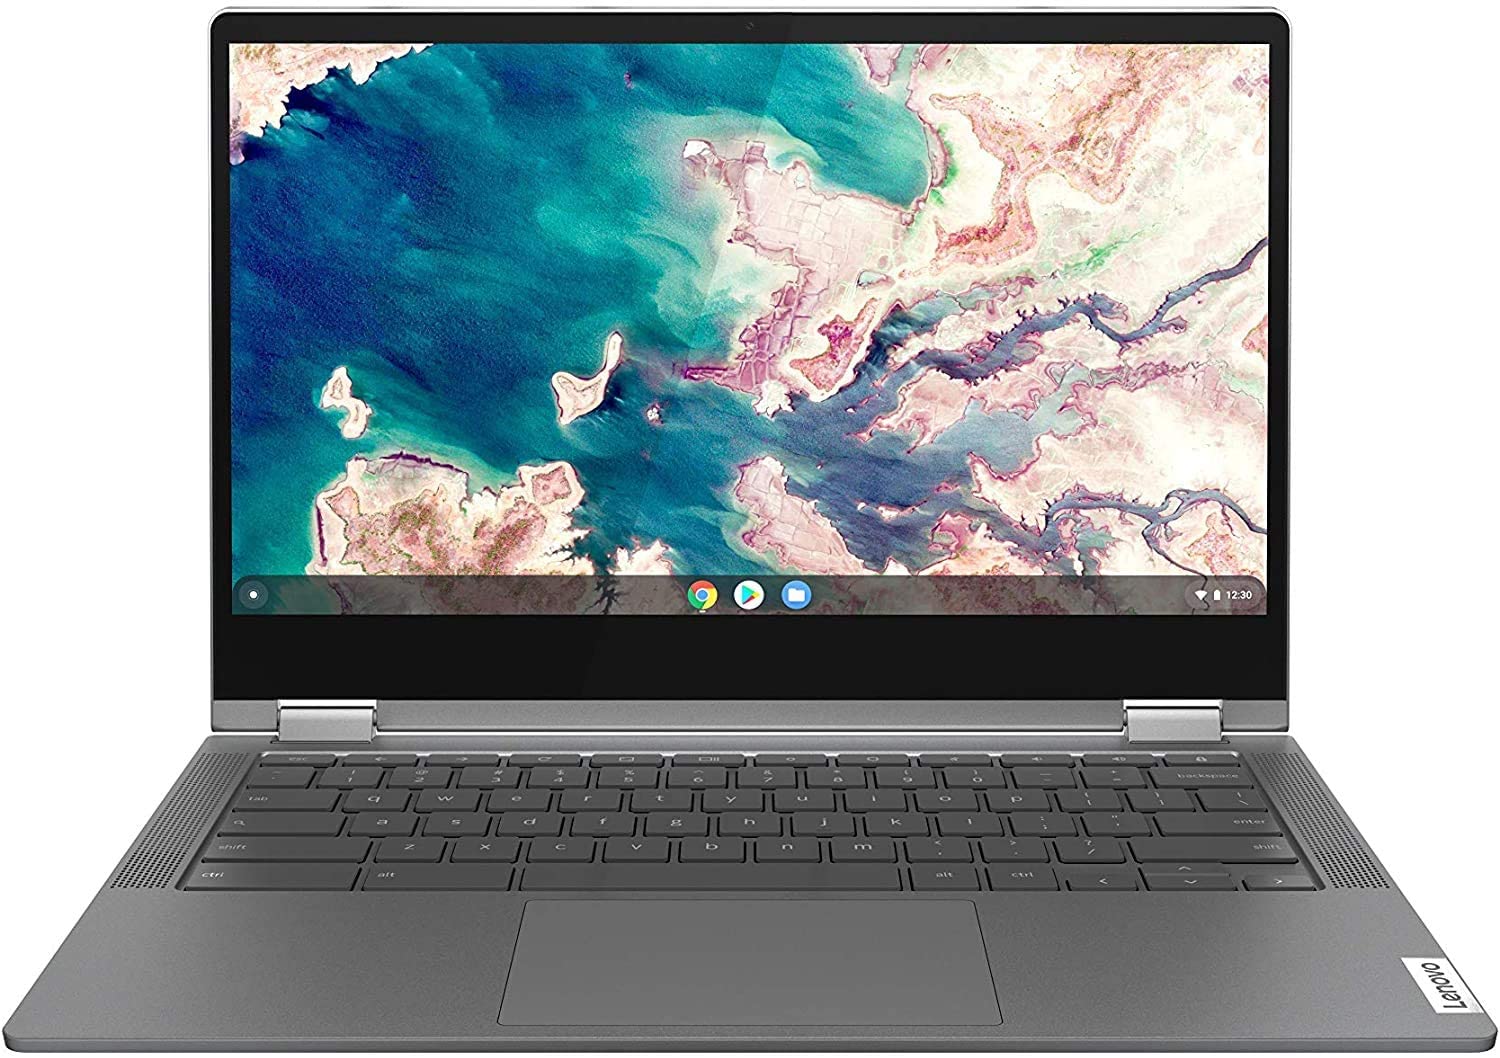 7 Best Laptop For Work Under 500 In 2022 [Buying Guide]